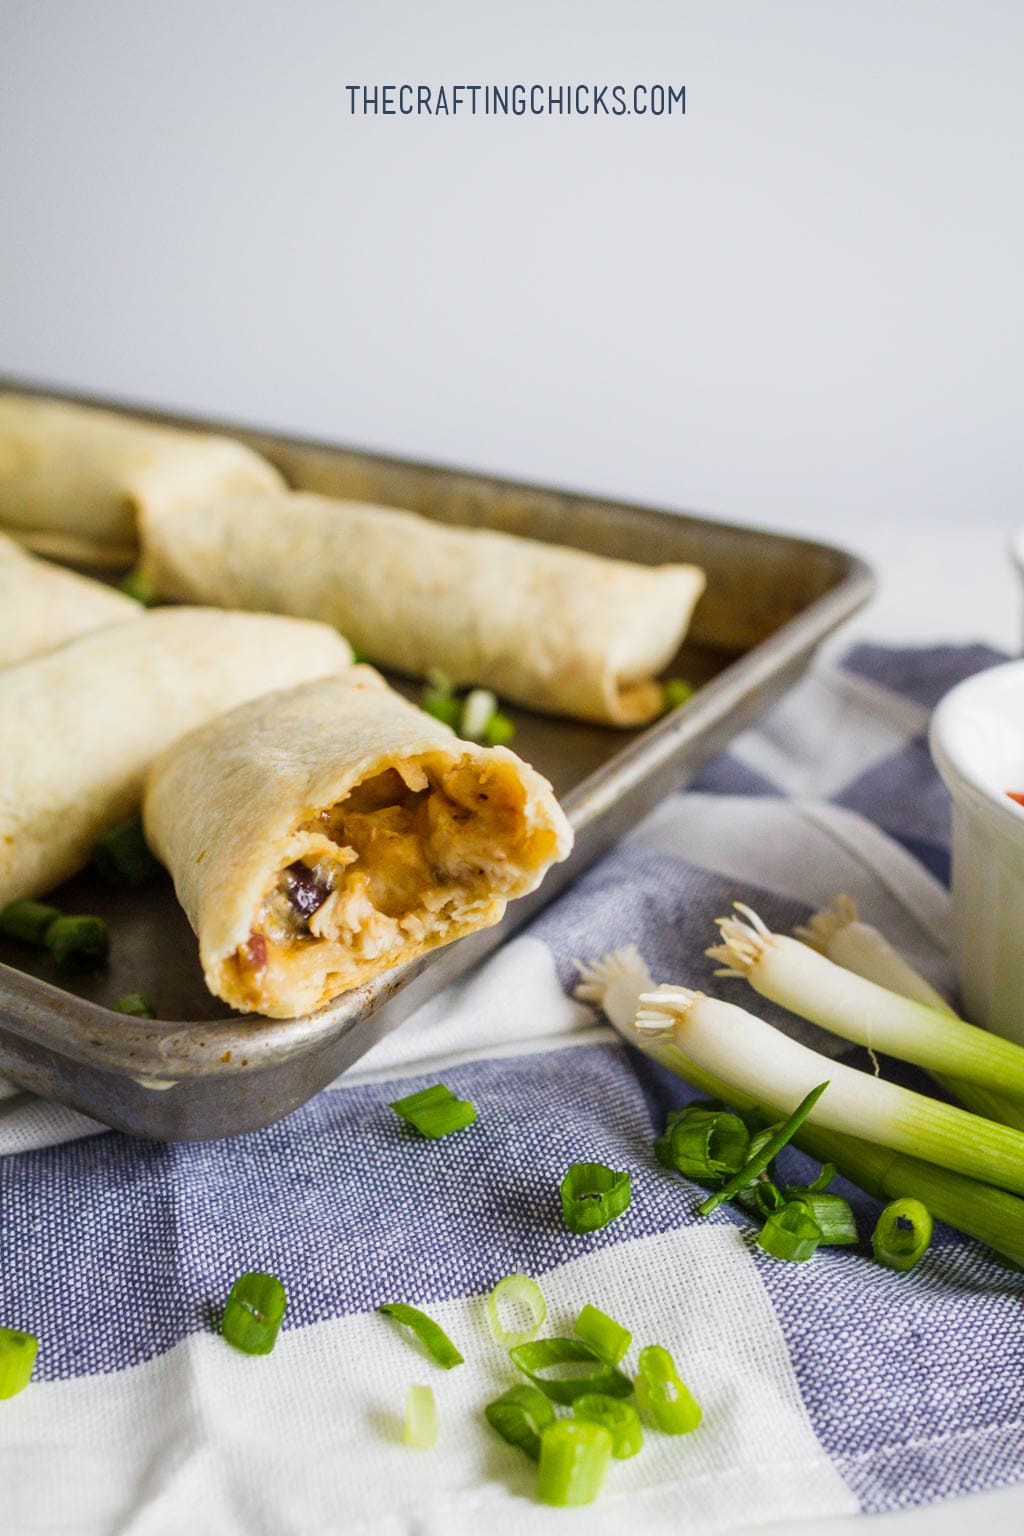 Spicy Black Bean Burritos - one of our favorite family recipes! Perfect for lunch on the go or a quick dinner. Don't forget to make extra to freeze!